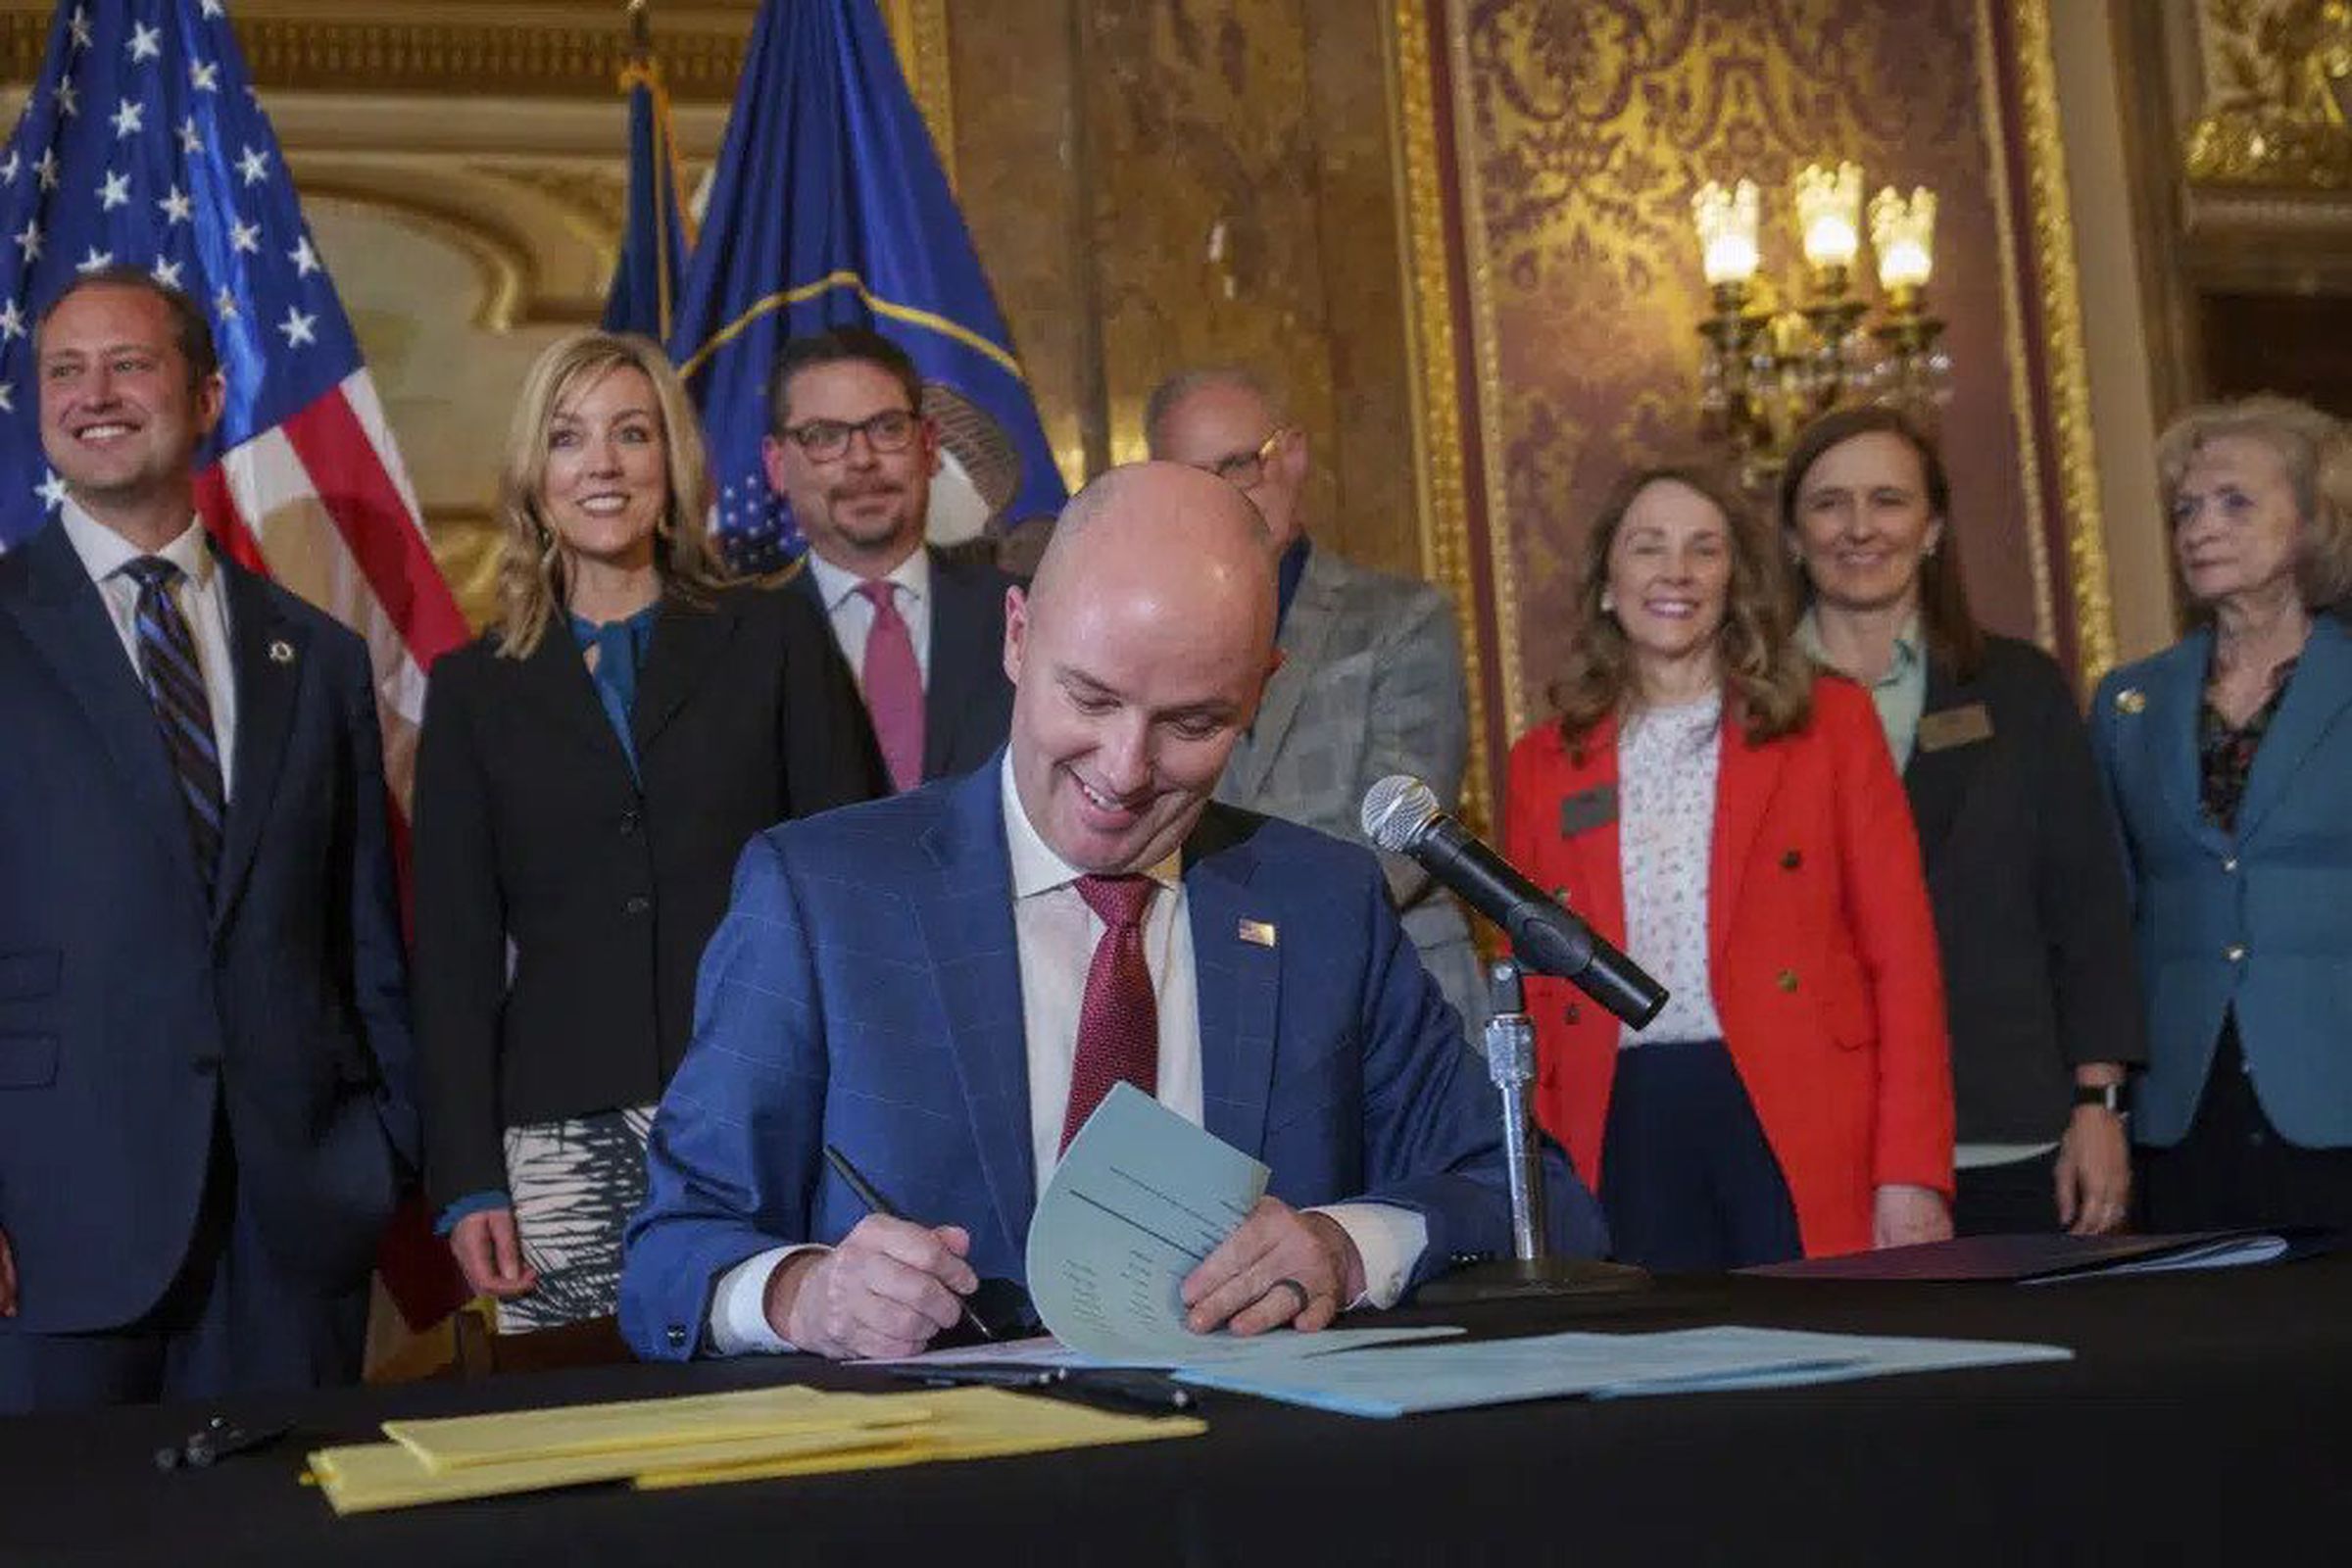 Gov. Spencer Cox signs two regulation bills that limit when and where children can use social media during a ceremony at the Capitol building in Salt Lake City on Thursday, March 23rd, 2023.